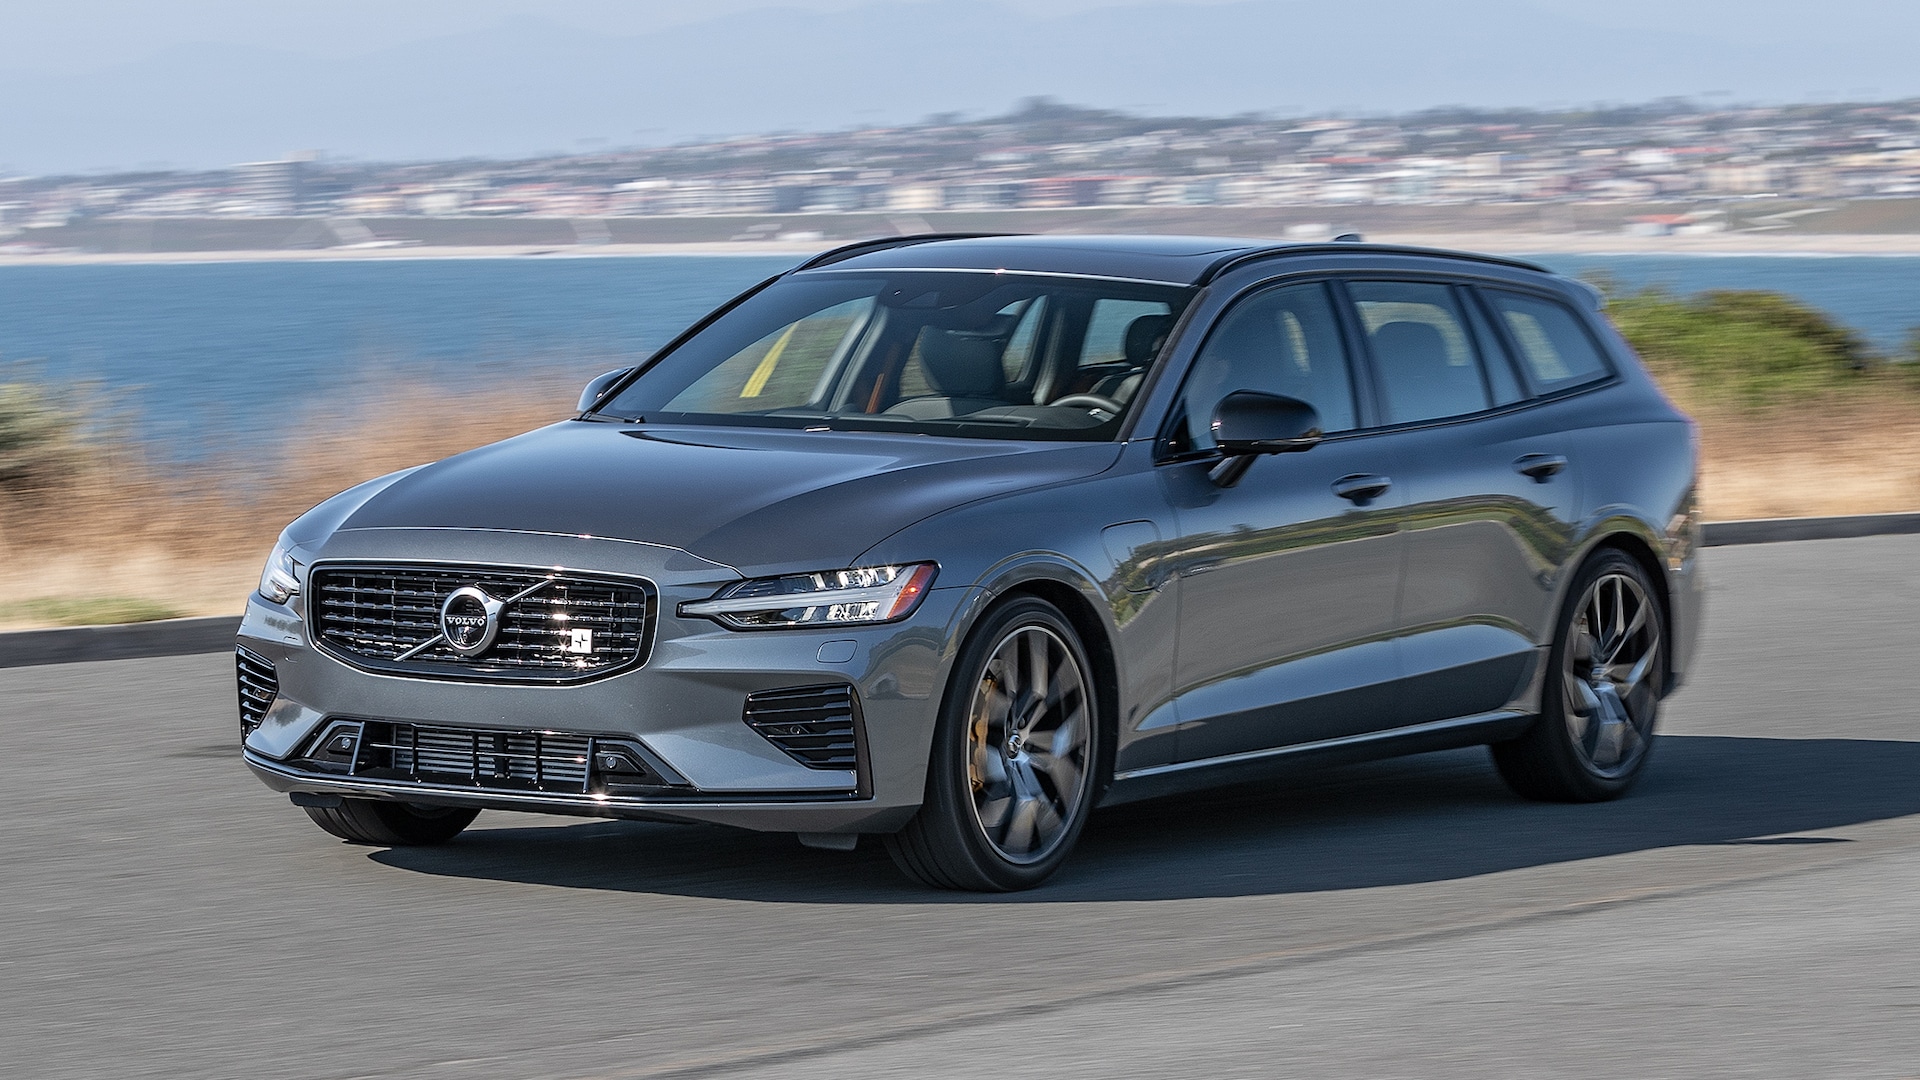 2020 Volvo V60 Polestar Engineered First Drive Review: Boxy and Good